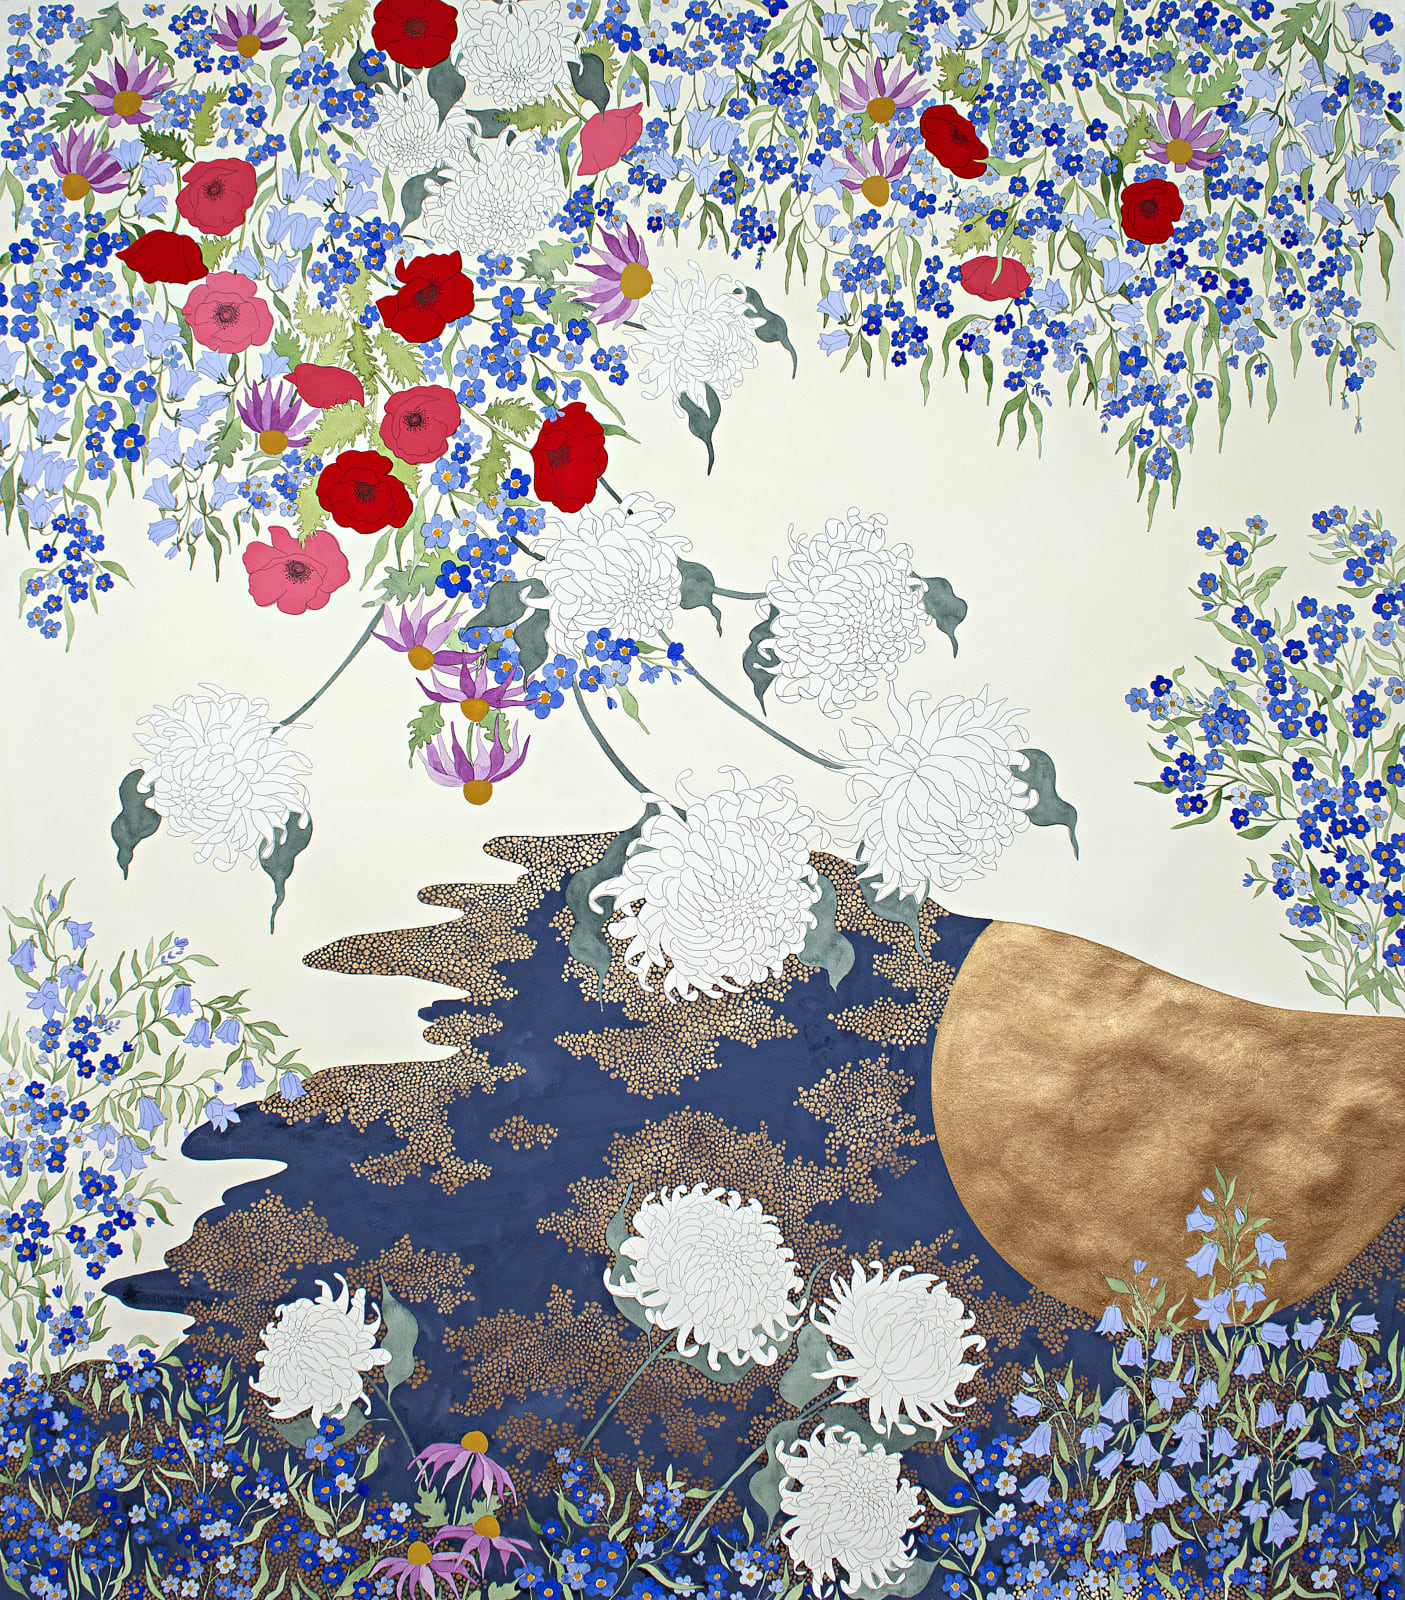 Crystal Liu, our place, “in the garden”, 2022